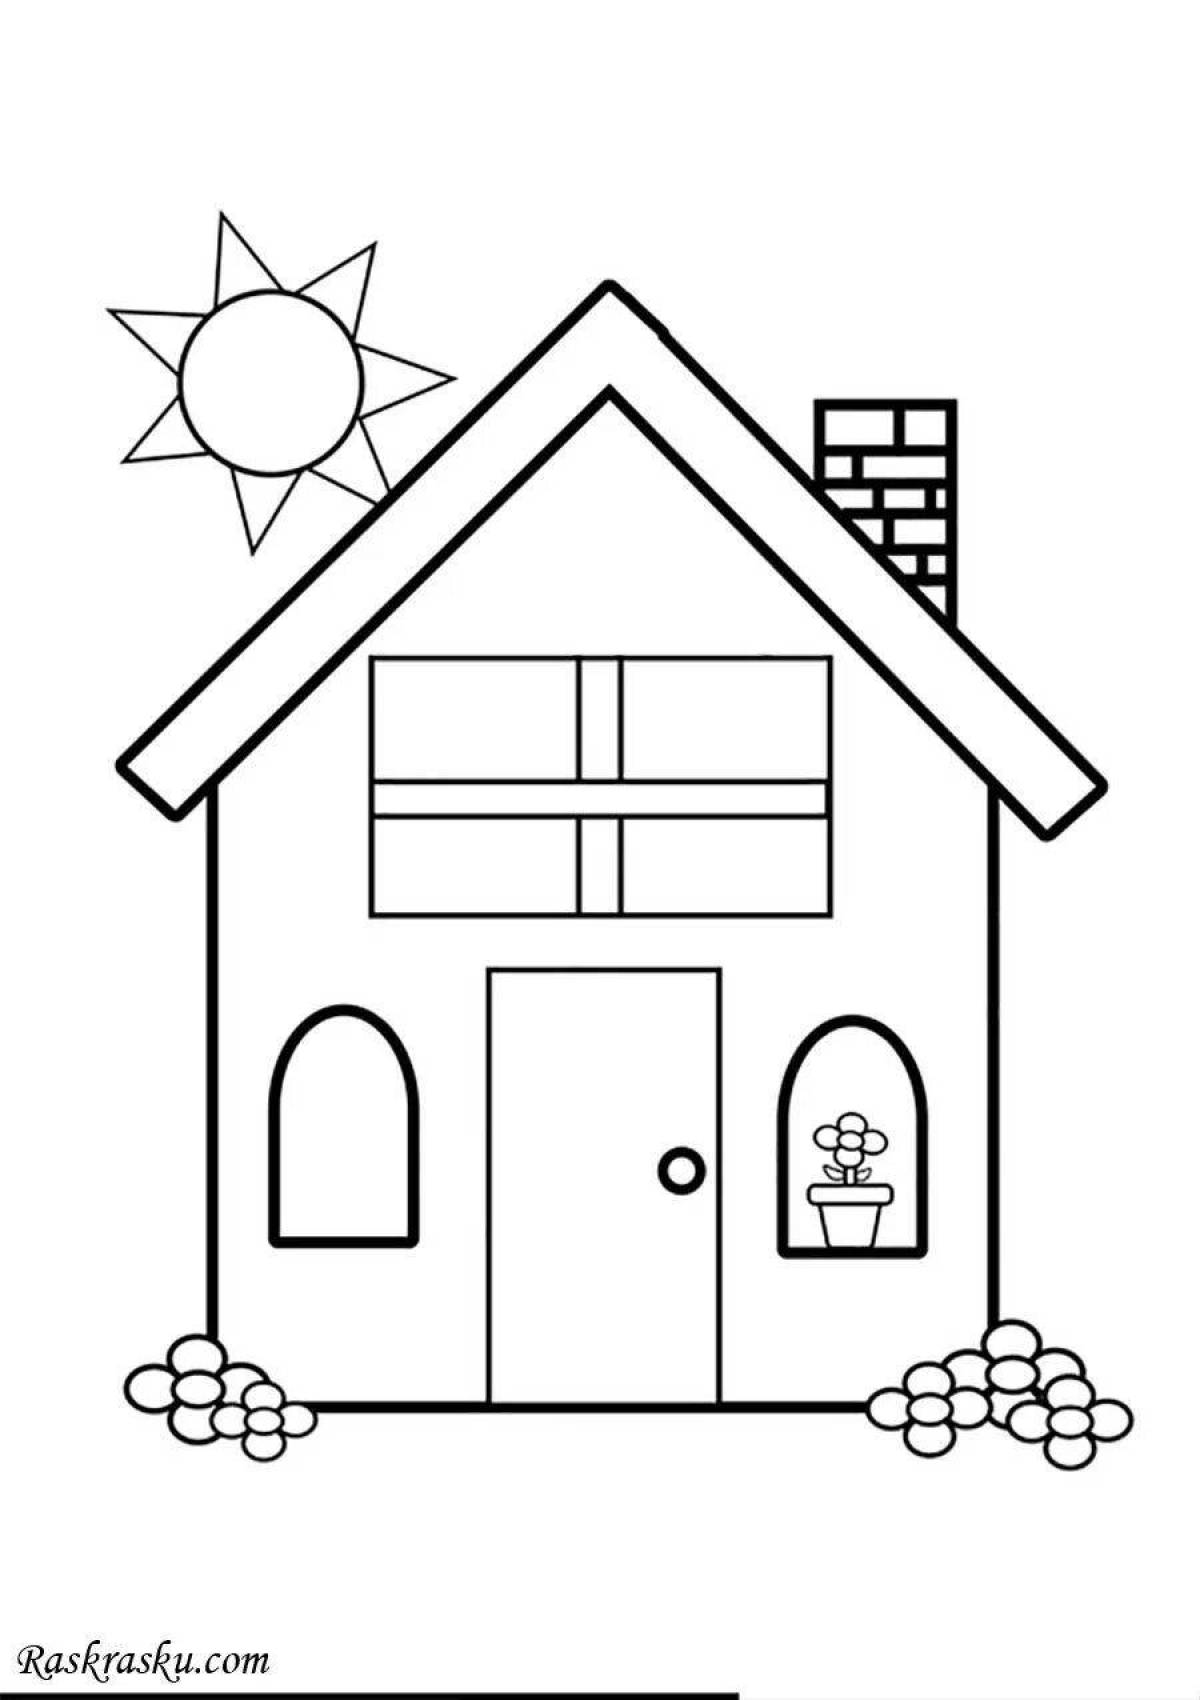 Adorable house drawing sheet for kids